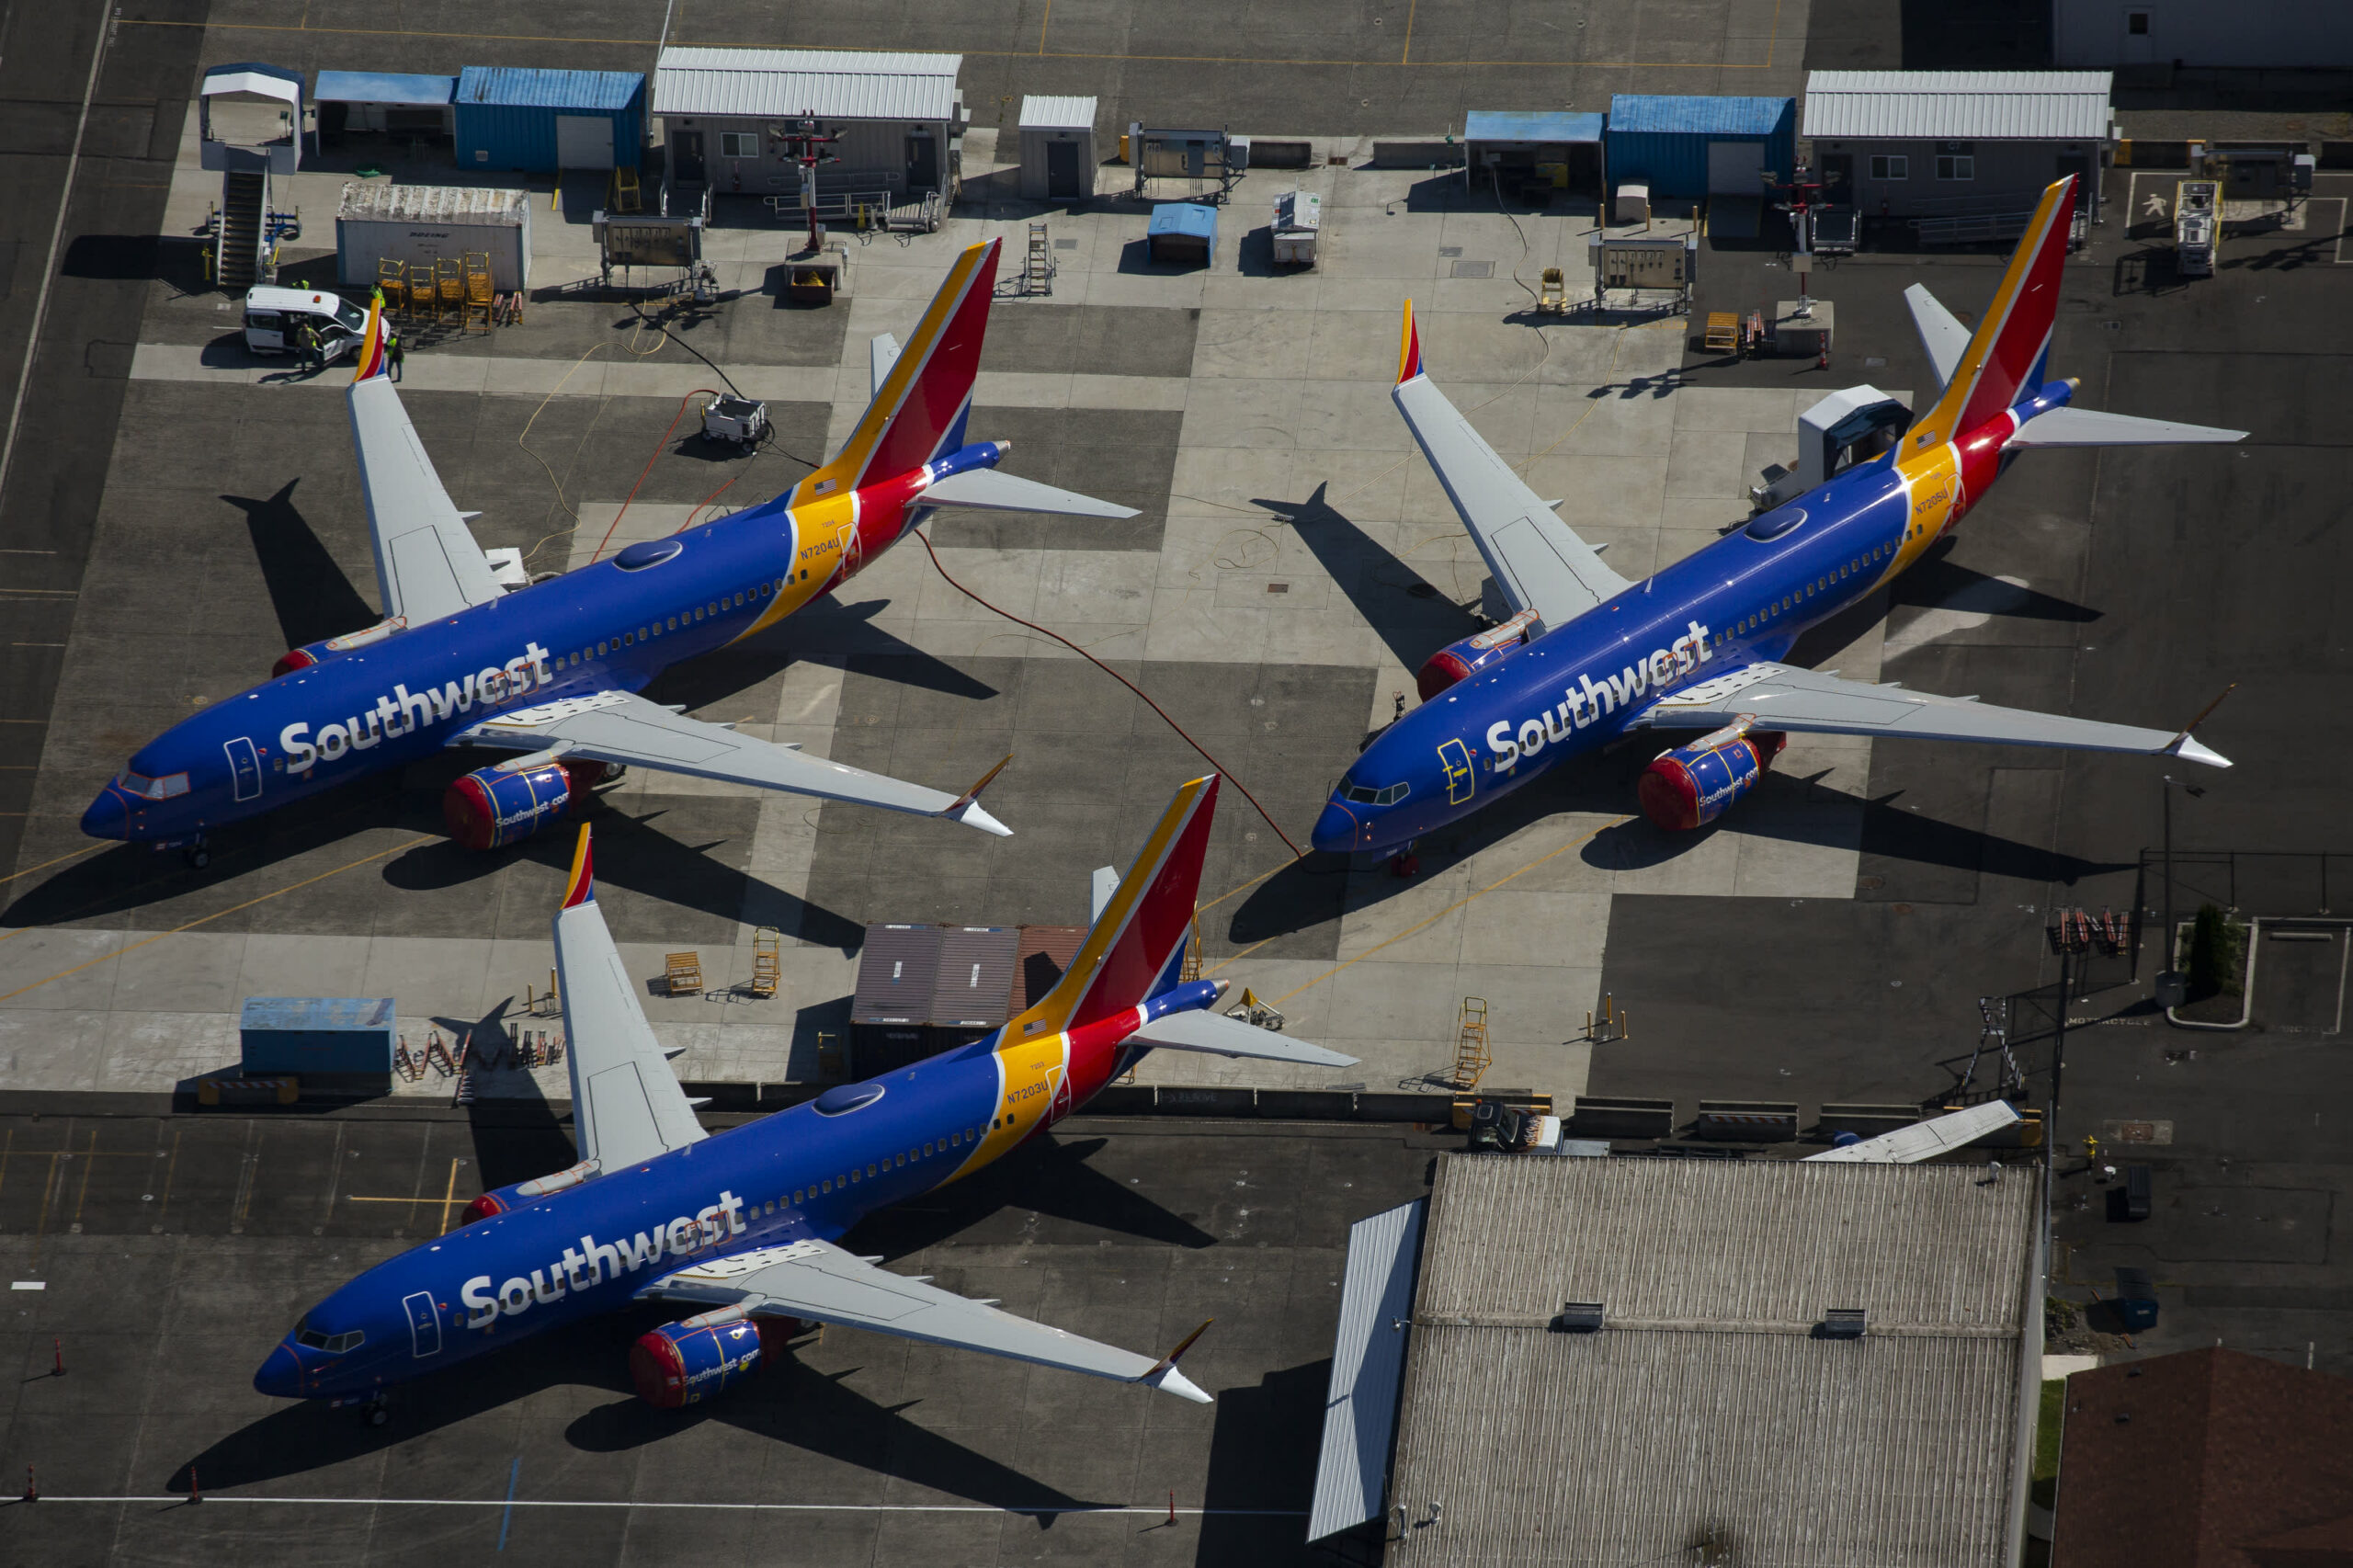 Southwest orders 34 extra of Boeing’s smallest 737 Max airplane